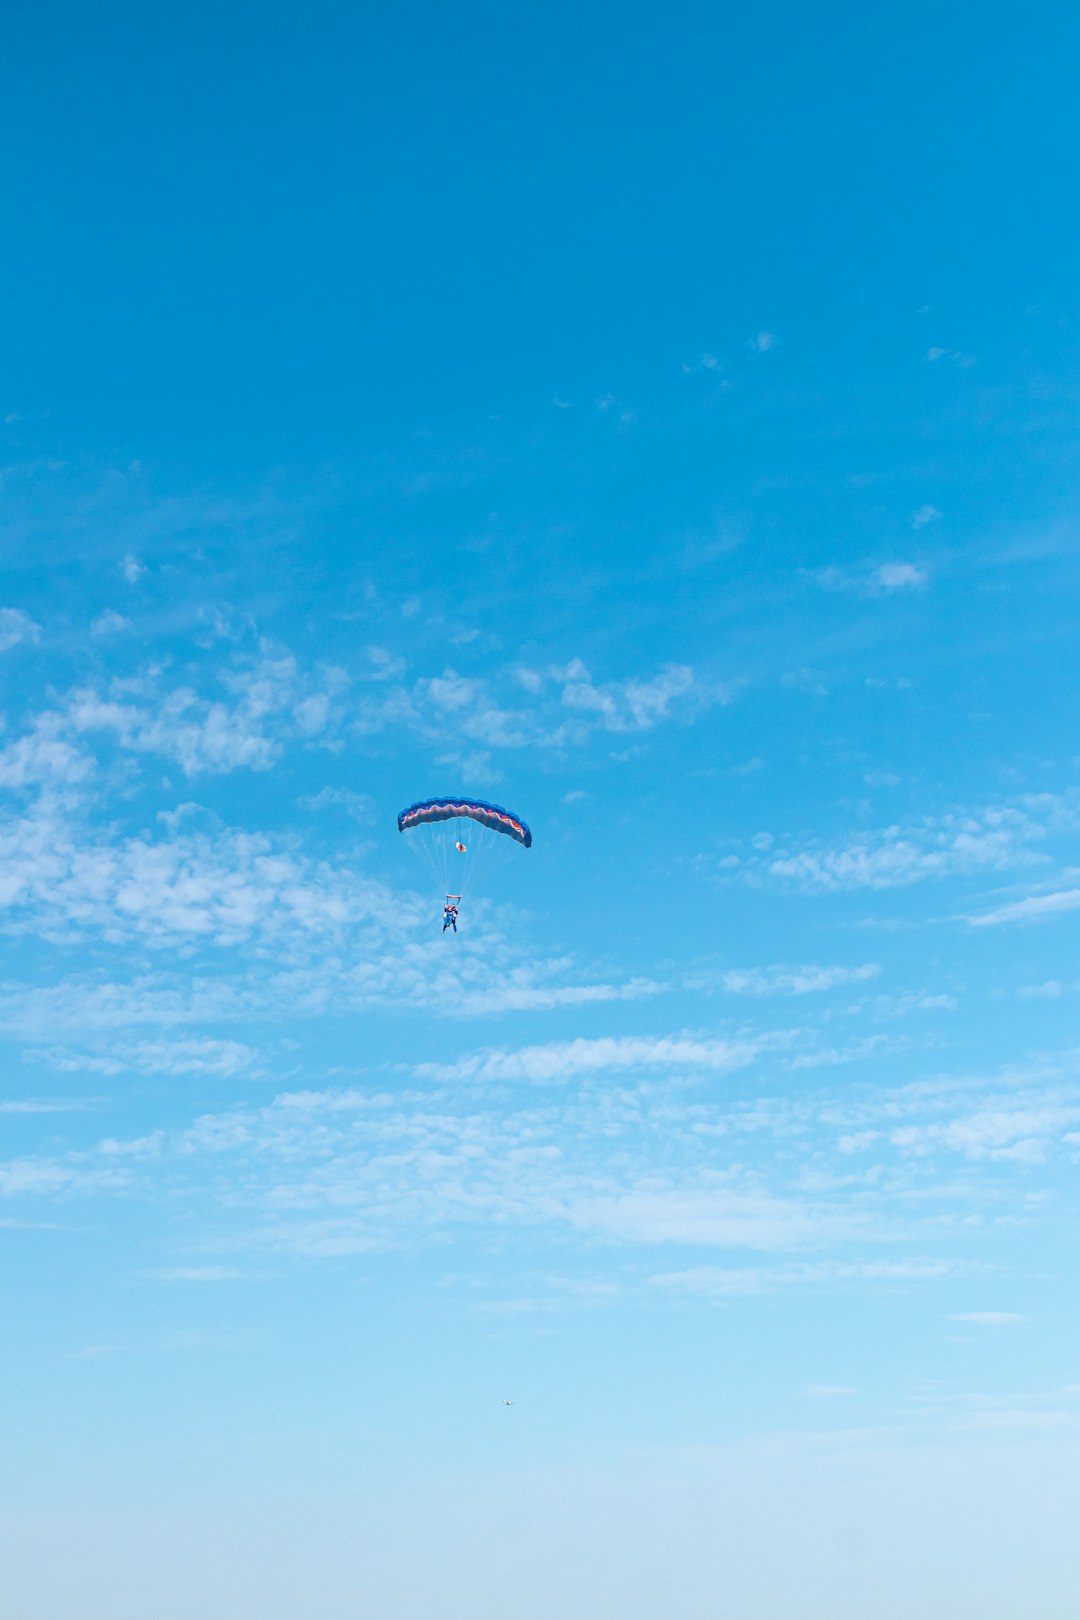 person in parachute under blue sky during daytime